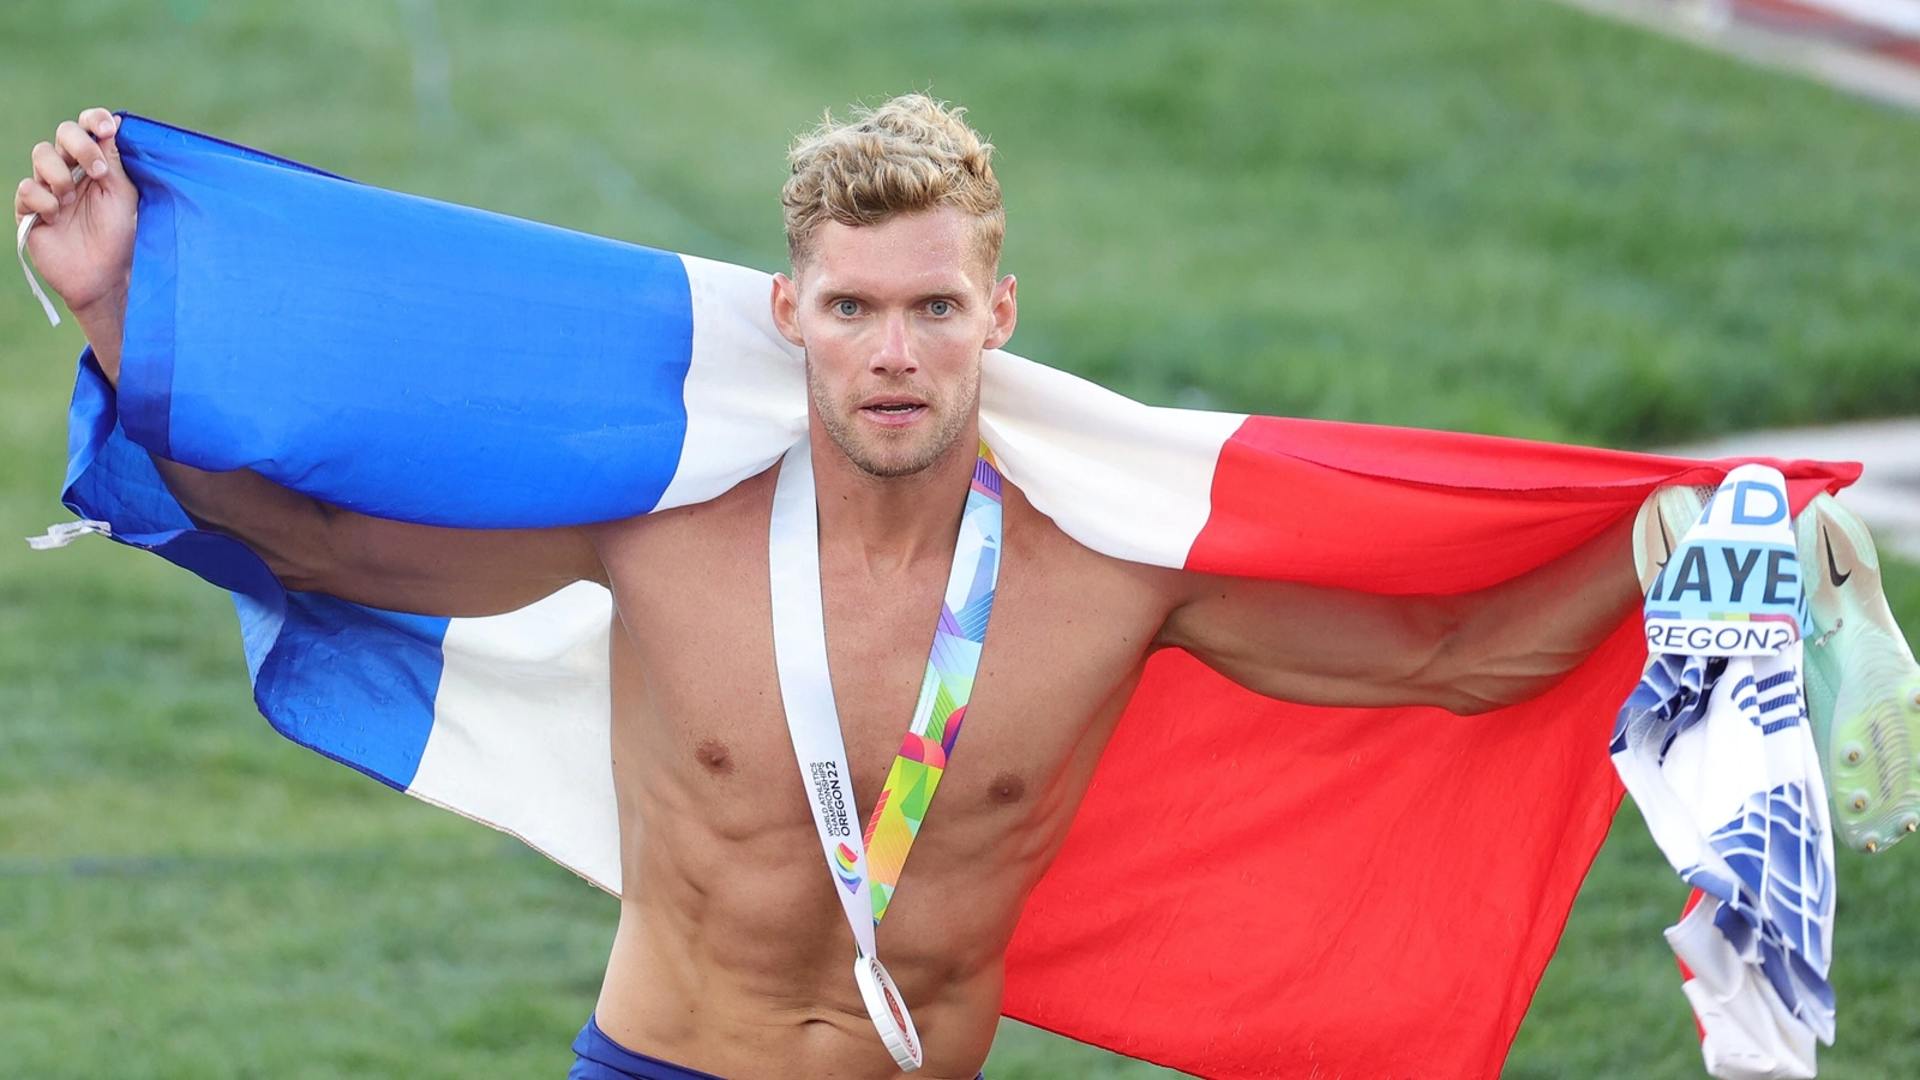 Kevin Mayer after defending his title at the World Championships 2022 (Image Credits - Olympics.com)